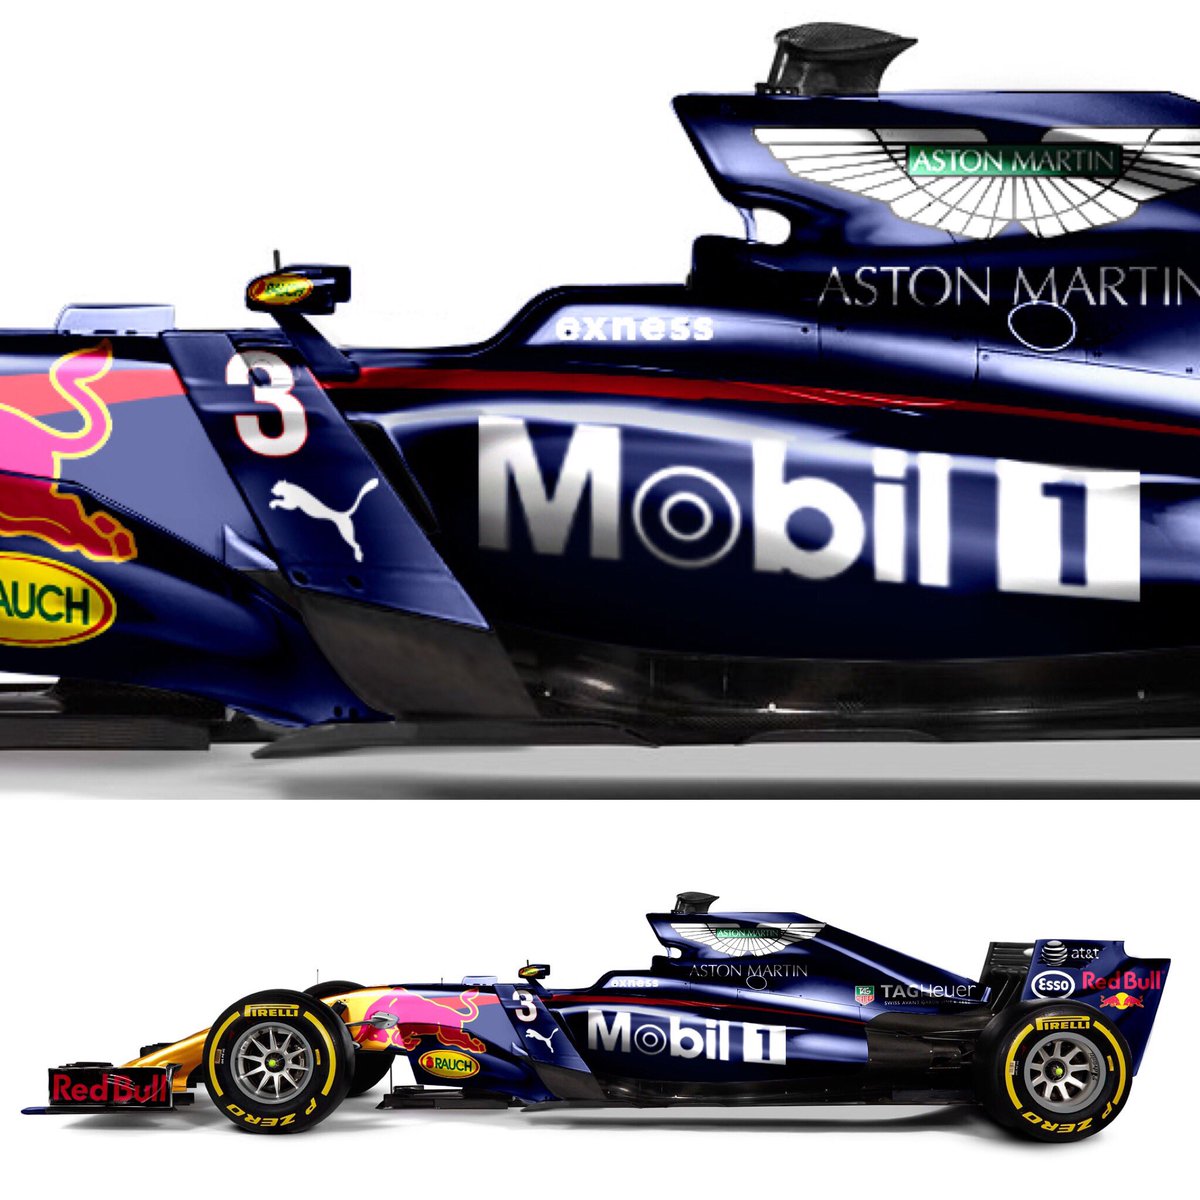 Sean Bull Design On Twitter Redbull 2017 Livery Concepts Which